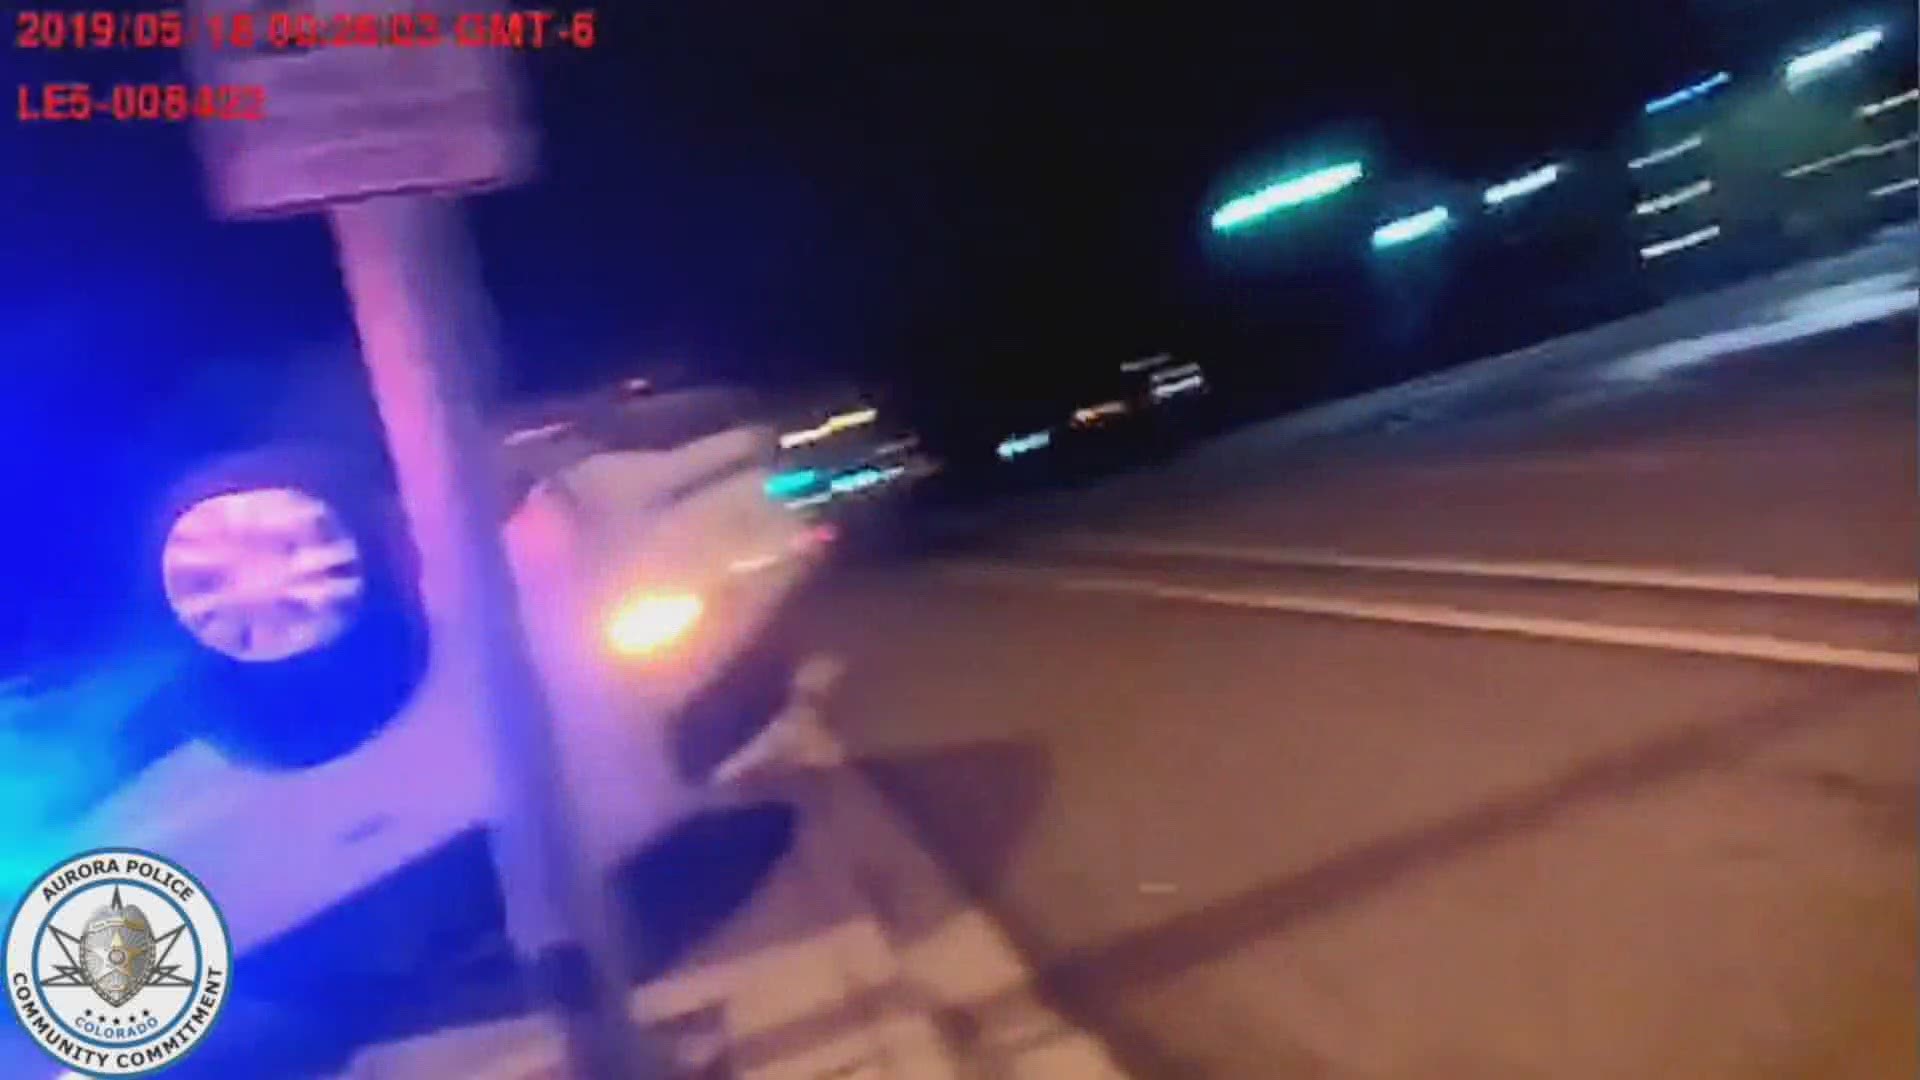 A body camera worn by an Aurora Police officer captured the moments after a car plowed into a patrol car last weekend near 38th and Chambers. ( video is silent)